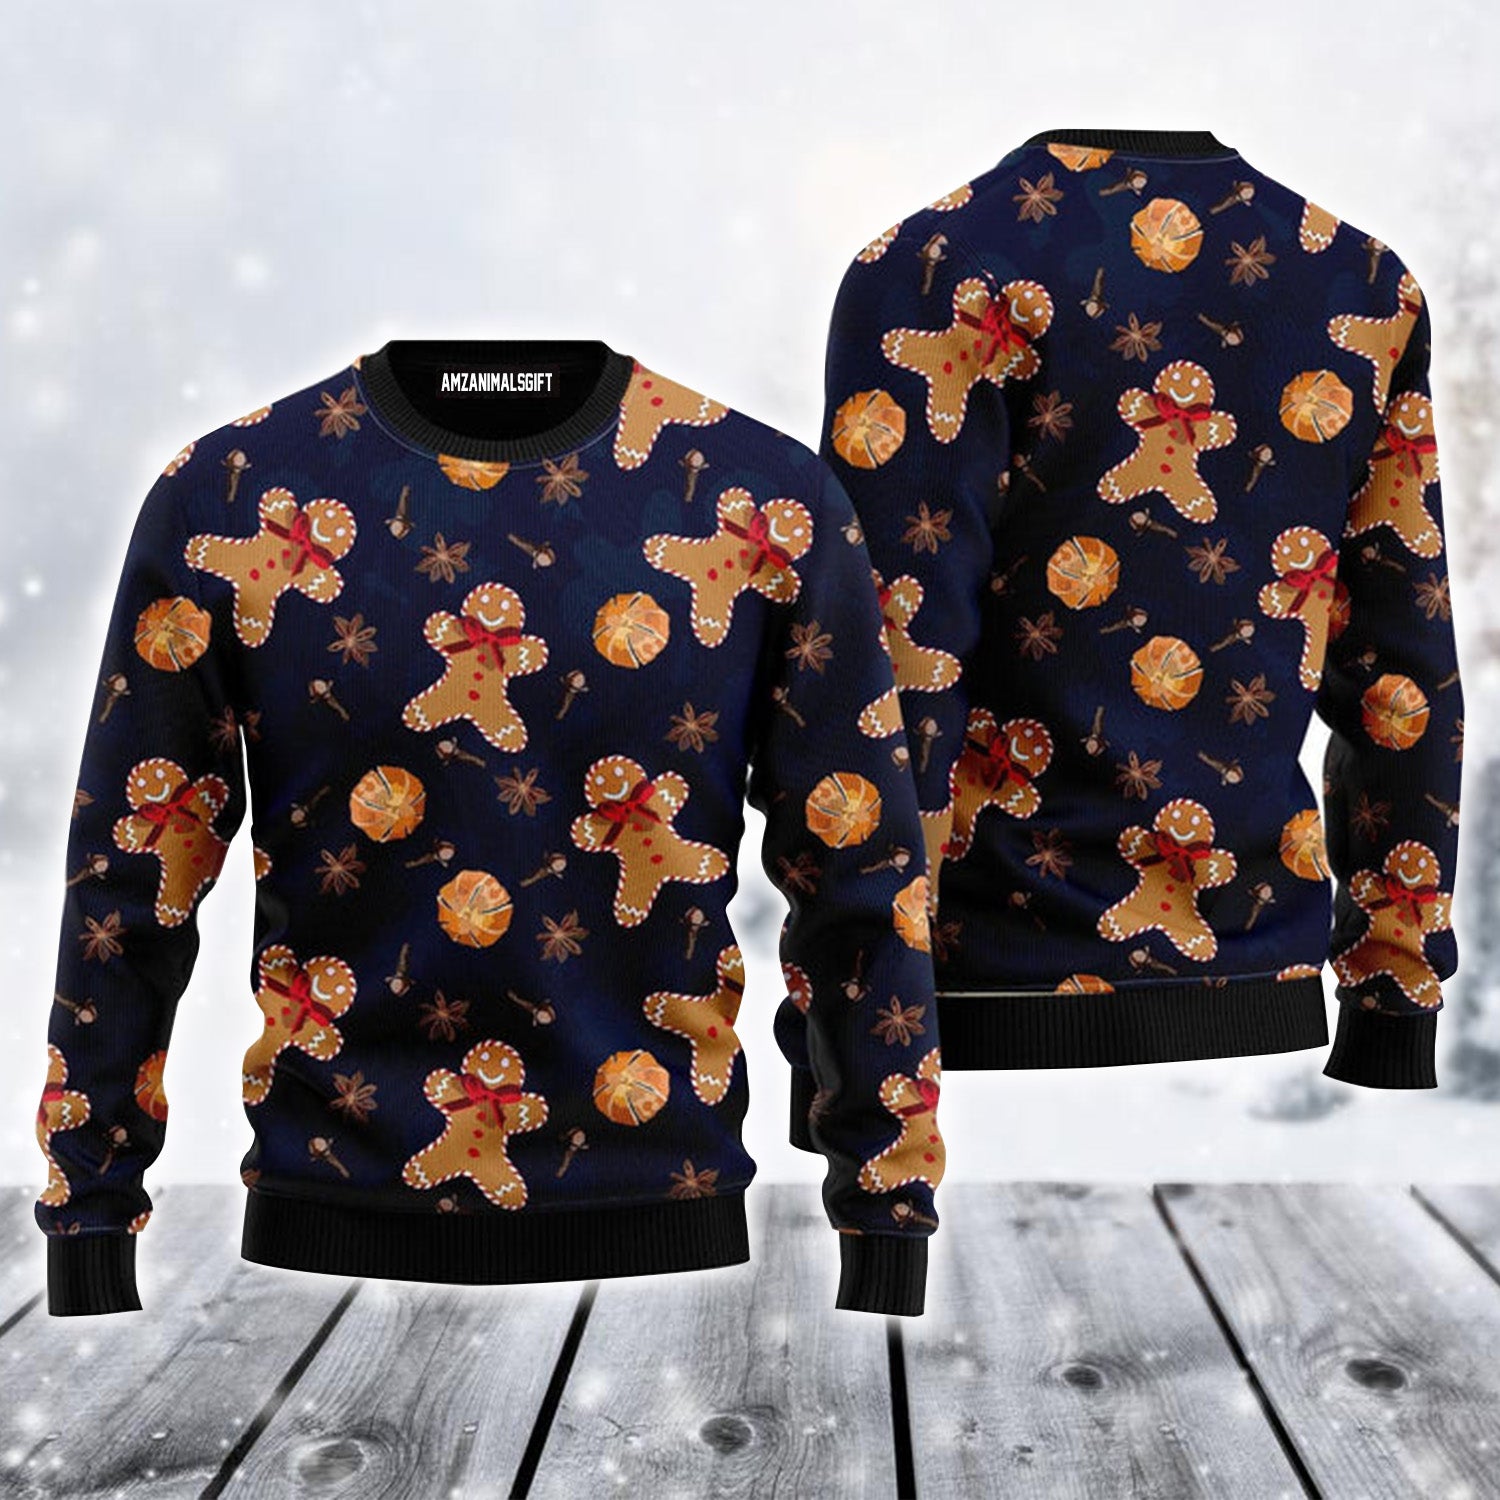 Gingerbread For Great Night Pattern Urly Christmas Sweater, Christmas Sweater For Men & Women - Perfect Gift For Christmas, Family, Friends